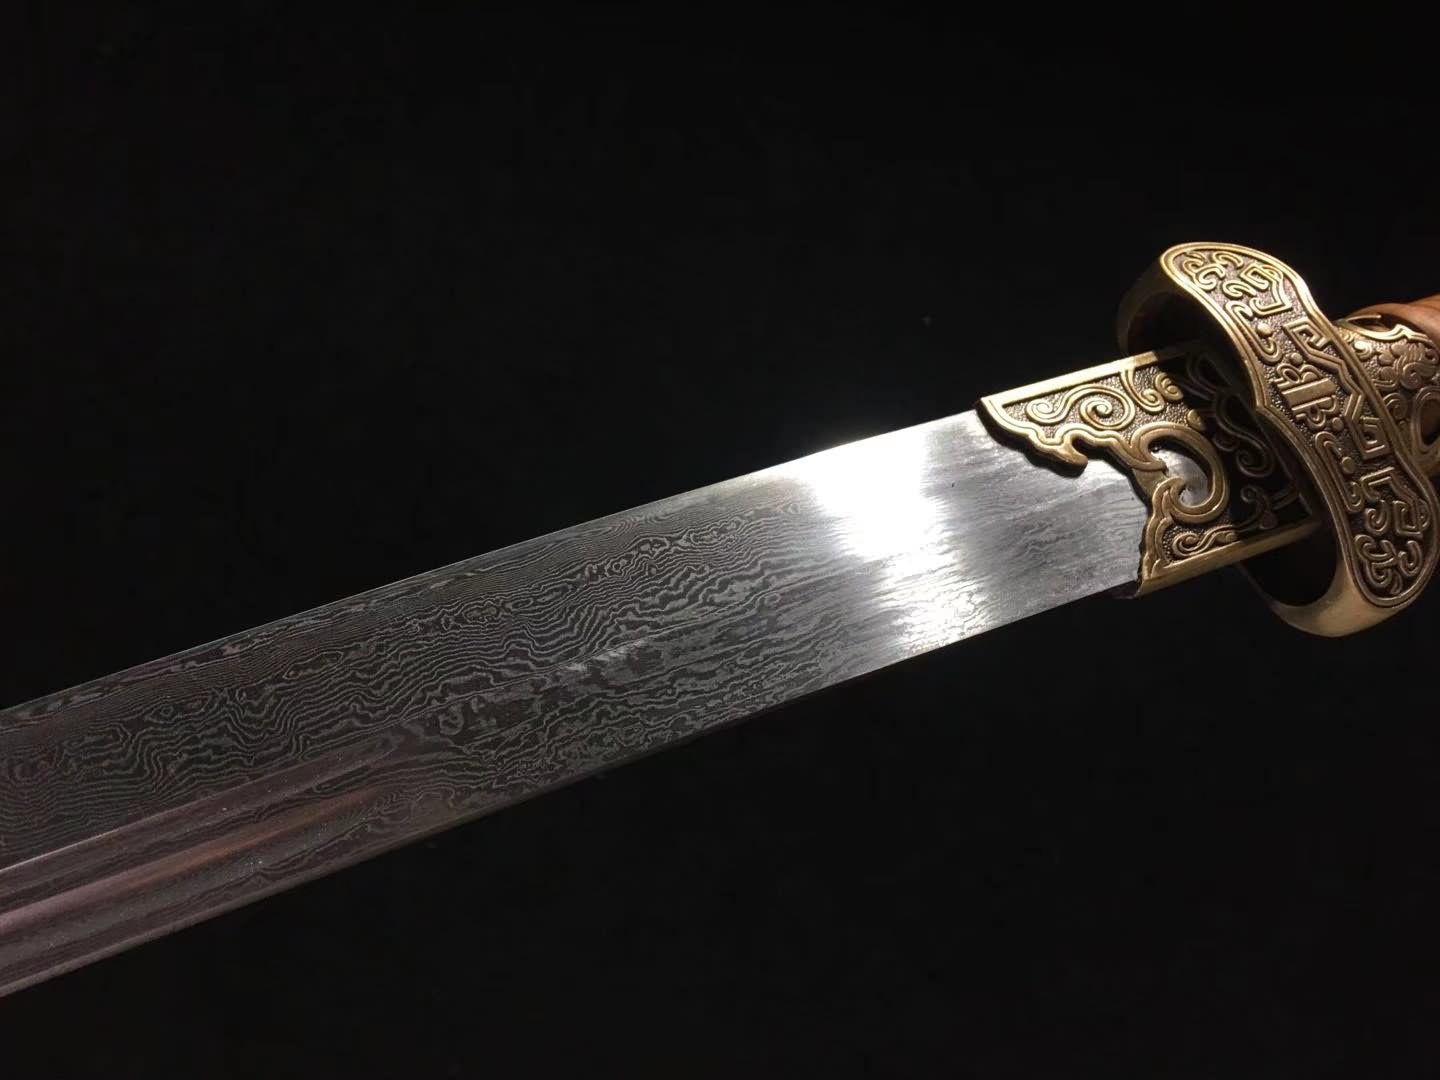 Chineae Swords Real,Black Gold Ancient dao,Hand Forged Damscus Blade,Brass Fittings